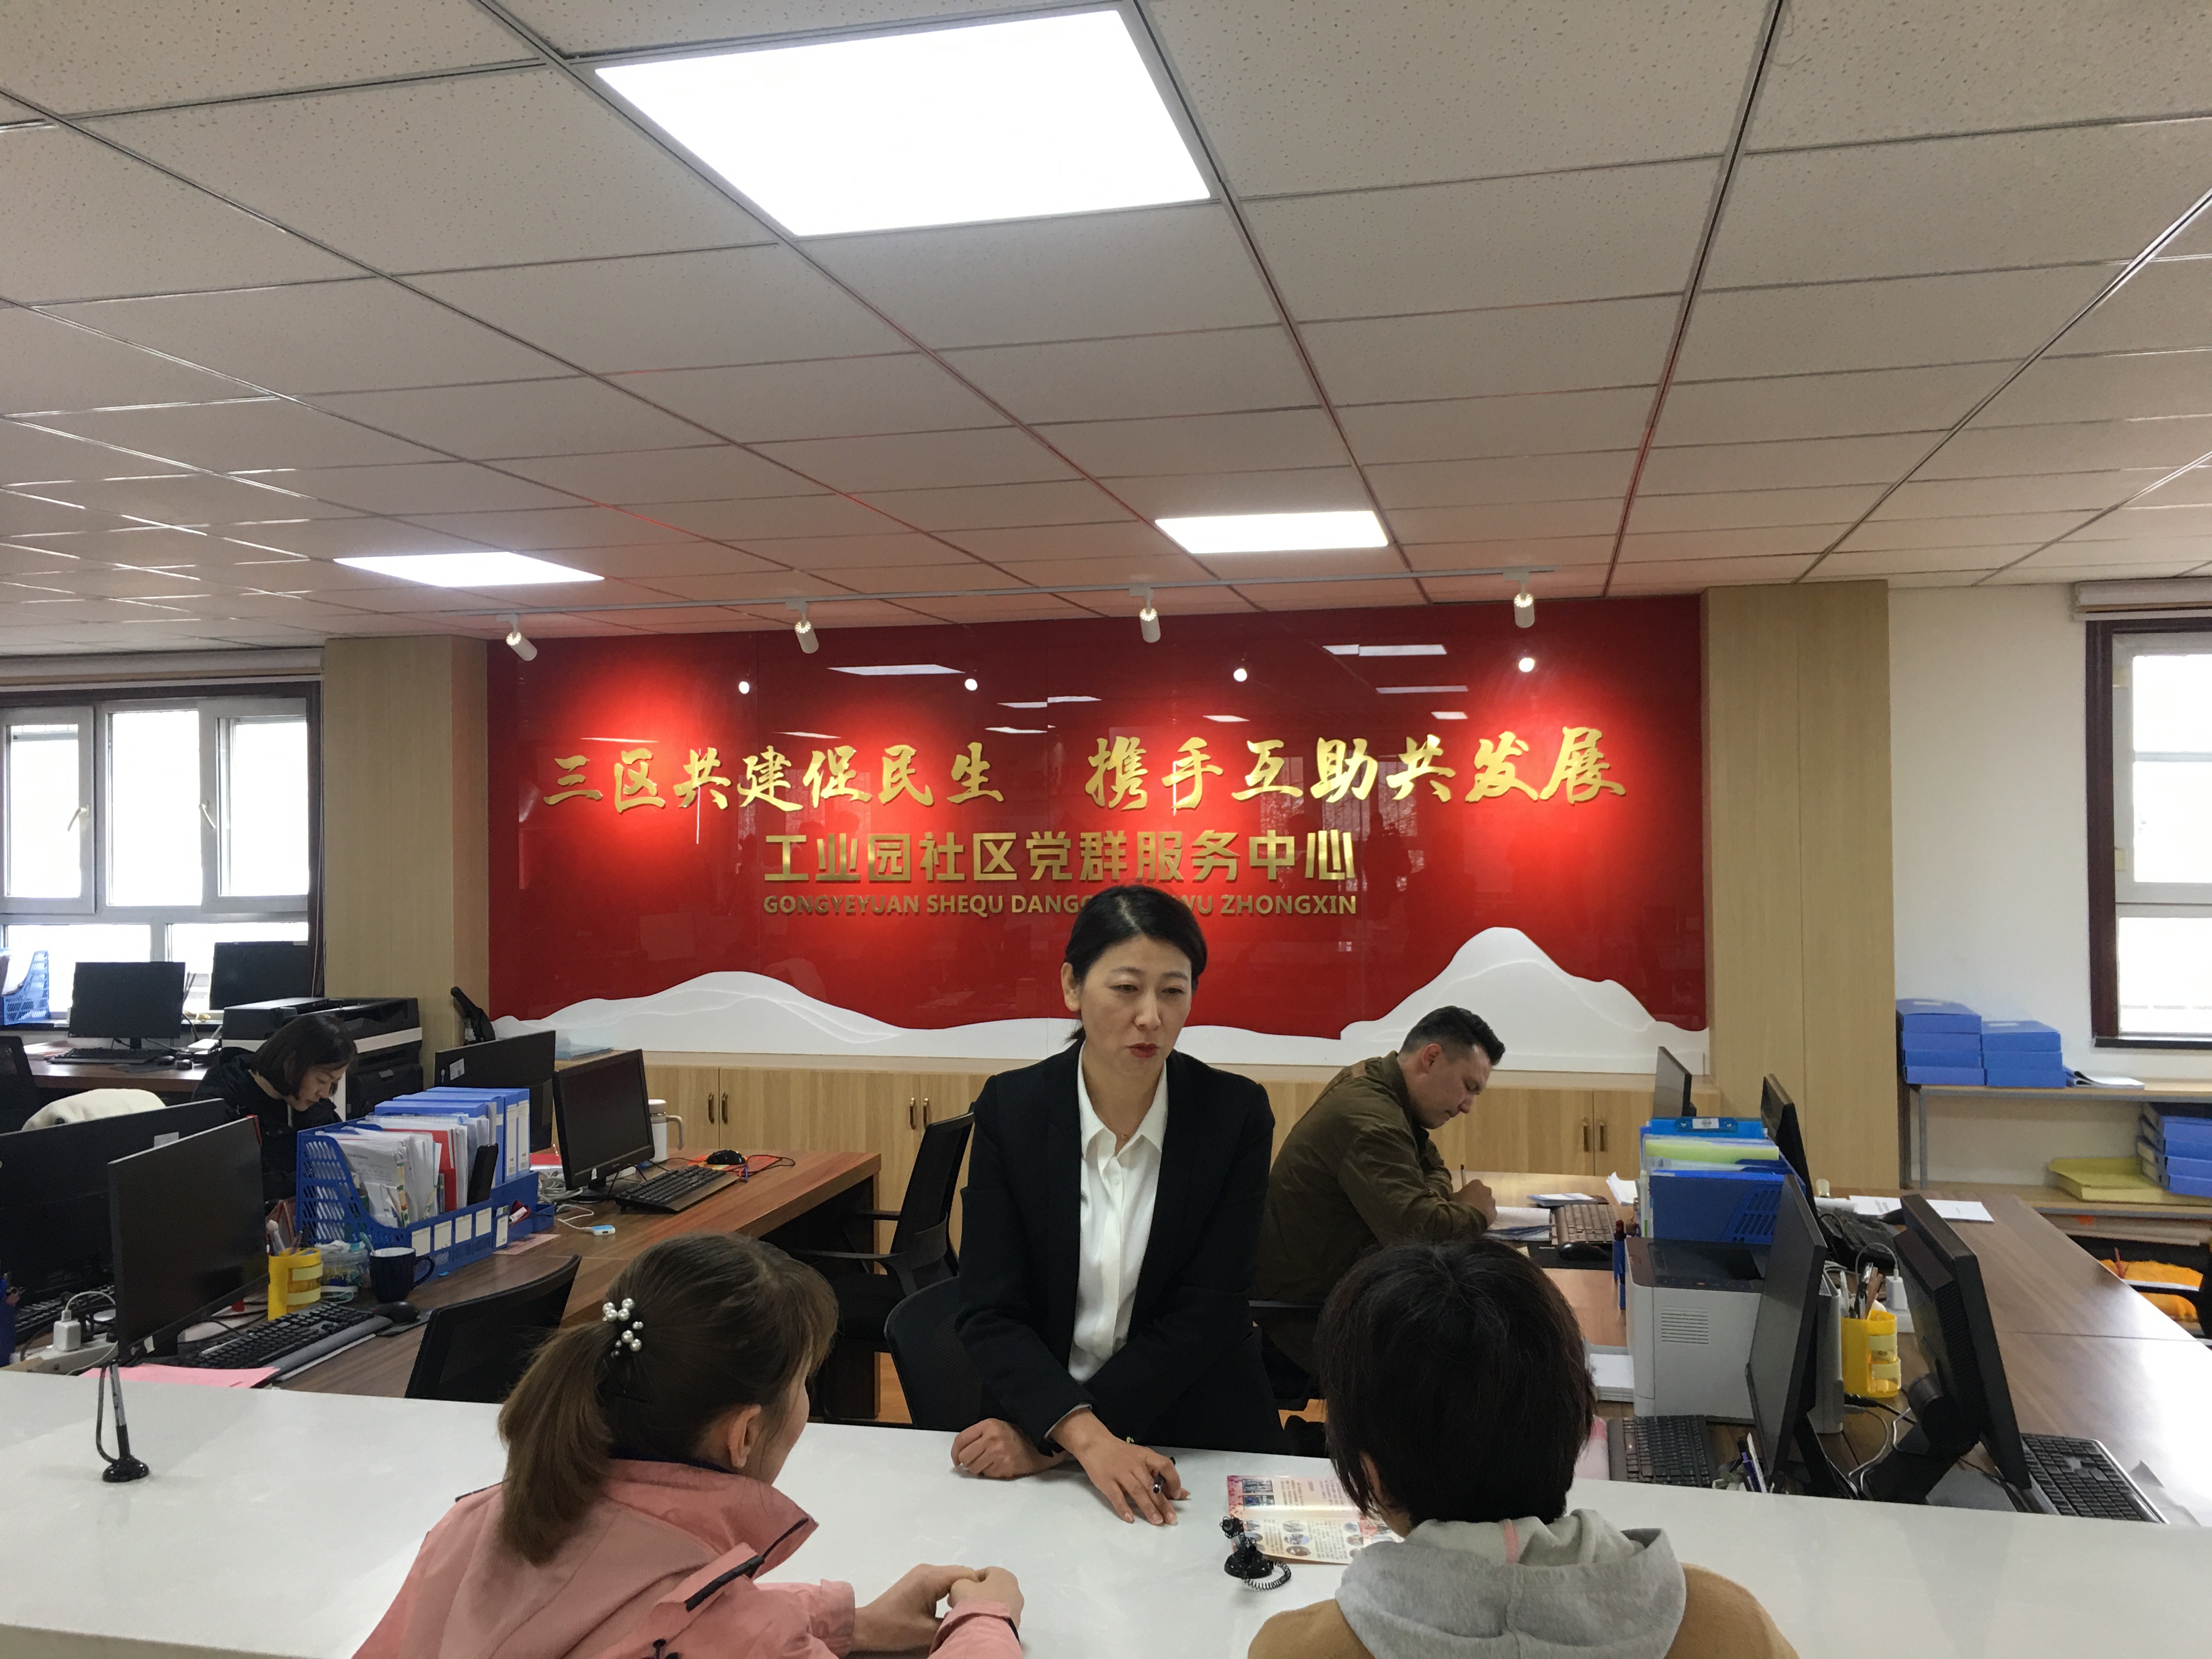 A public service employee talking to citizens at a service center in Urumqi.JPG (1.85 MB)